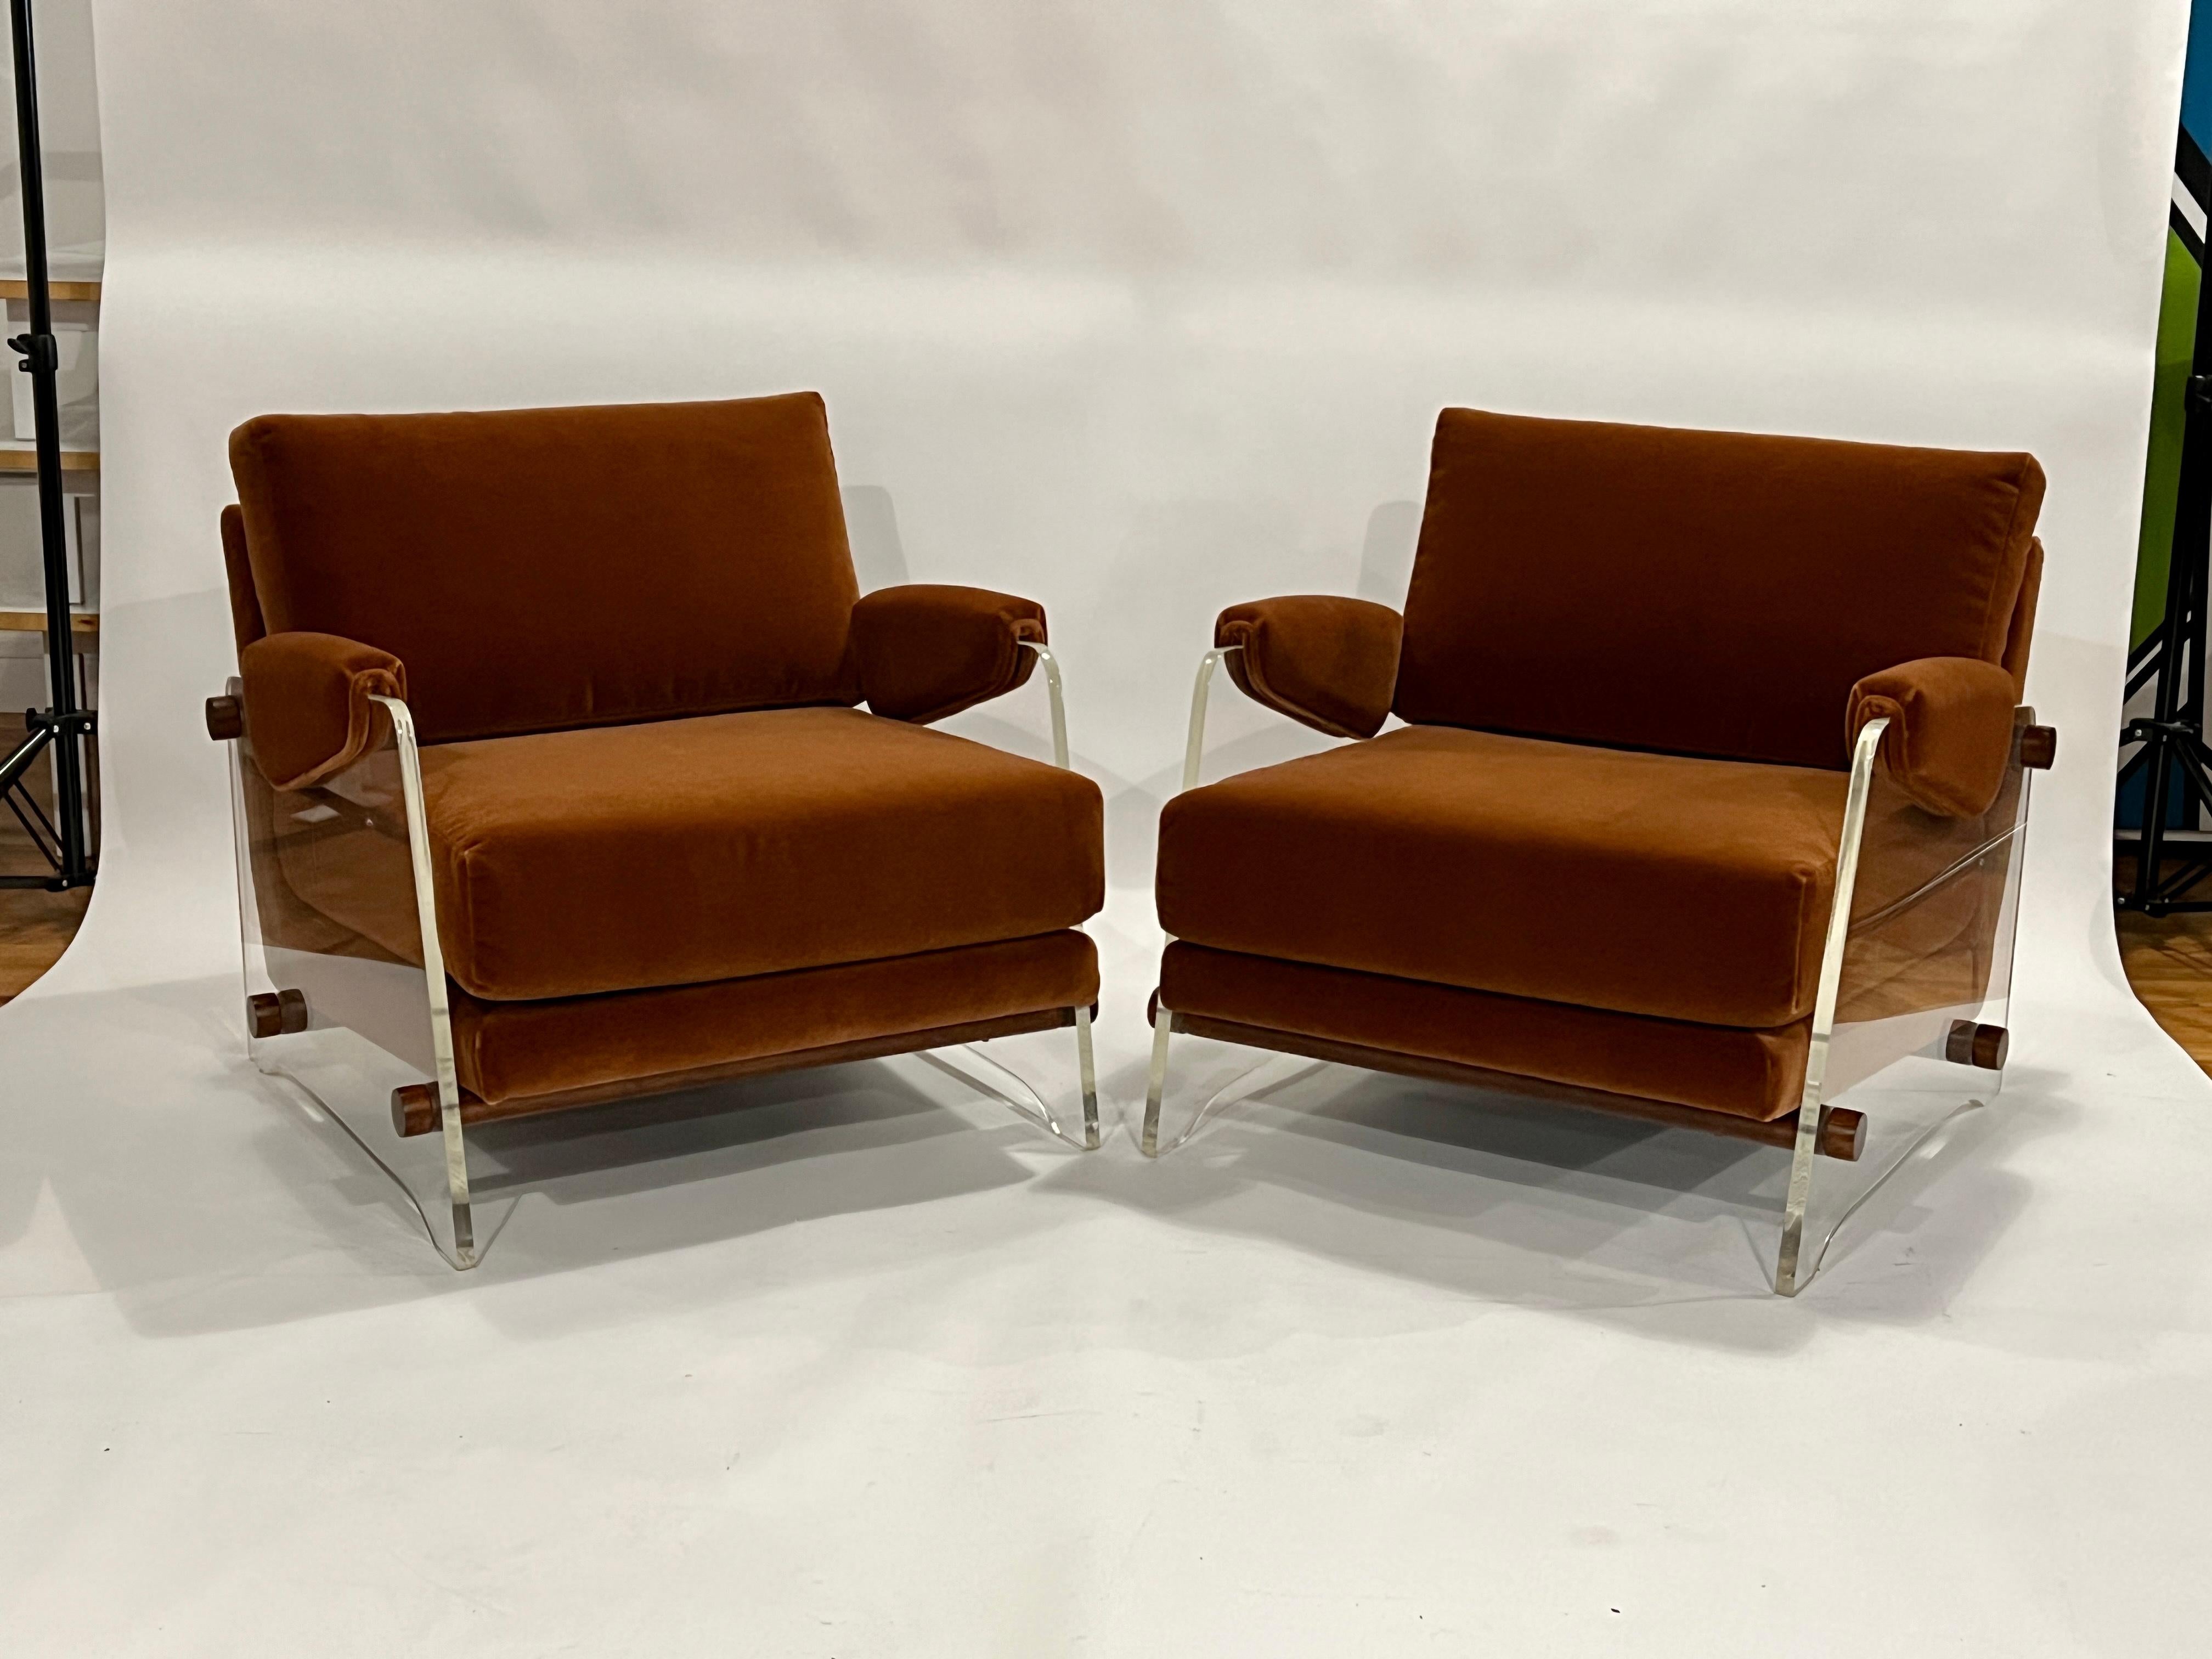 Pair of Lucite Lounge Chairs in Rust Mohair In Good Condition For Sale In Chicago, IL